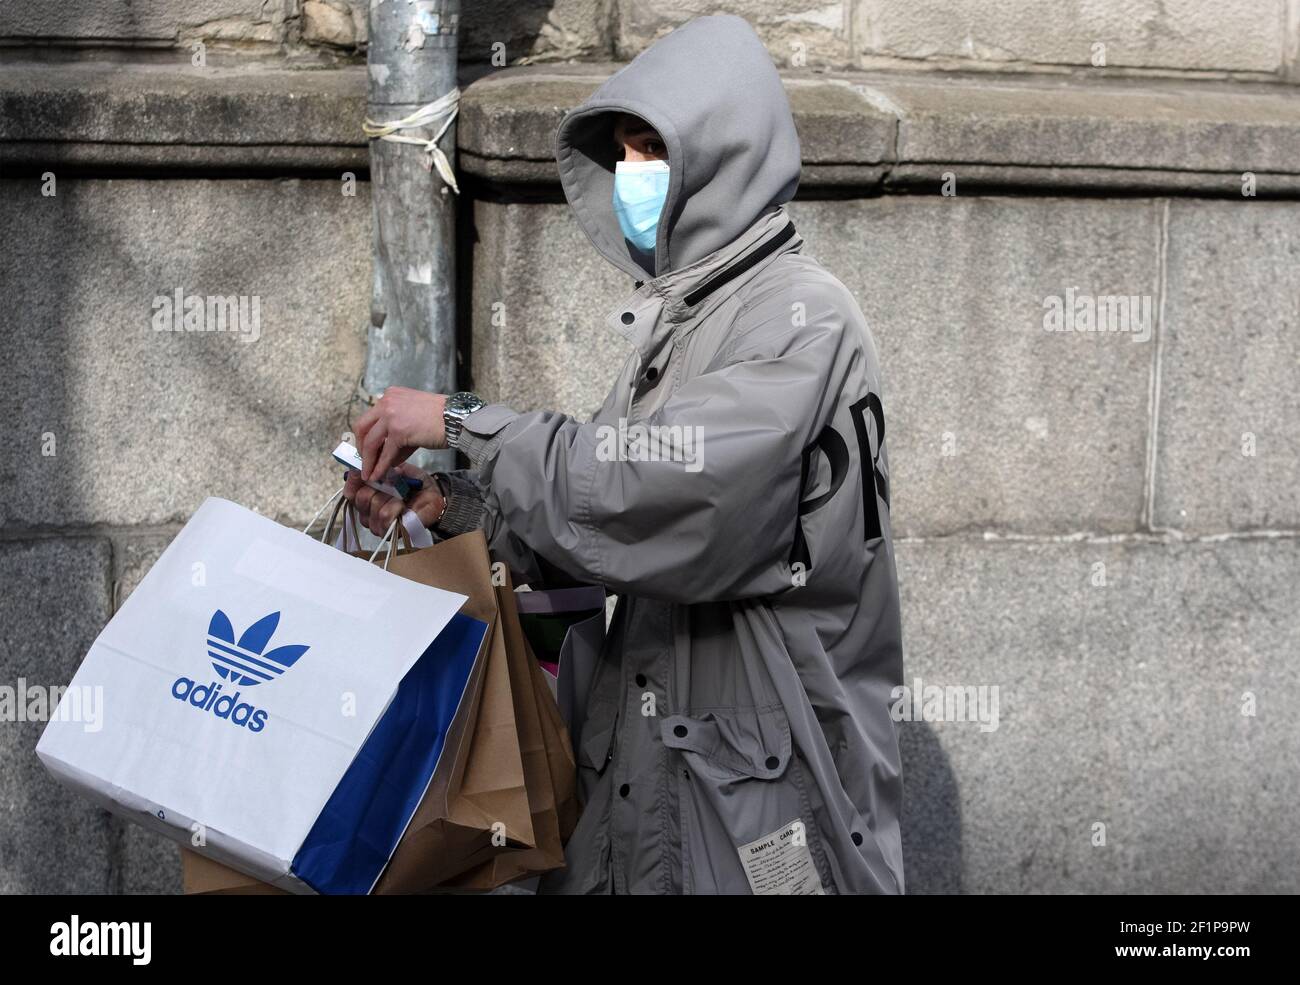 Kiev, Ukraine. 6th Mar, 2021. A shopper wearing a face mask as a precaution  against the spread of covid-19 seen holding a shopping bag with Adidas logo  on a street in Kiev.